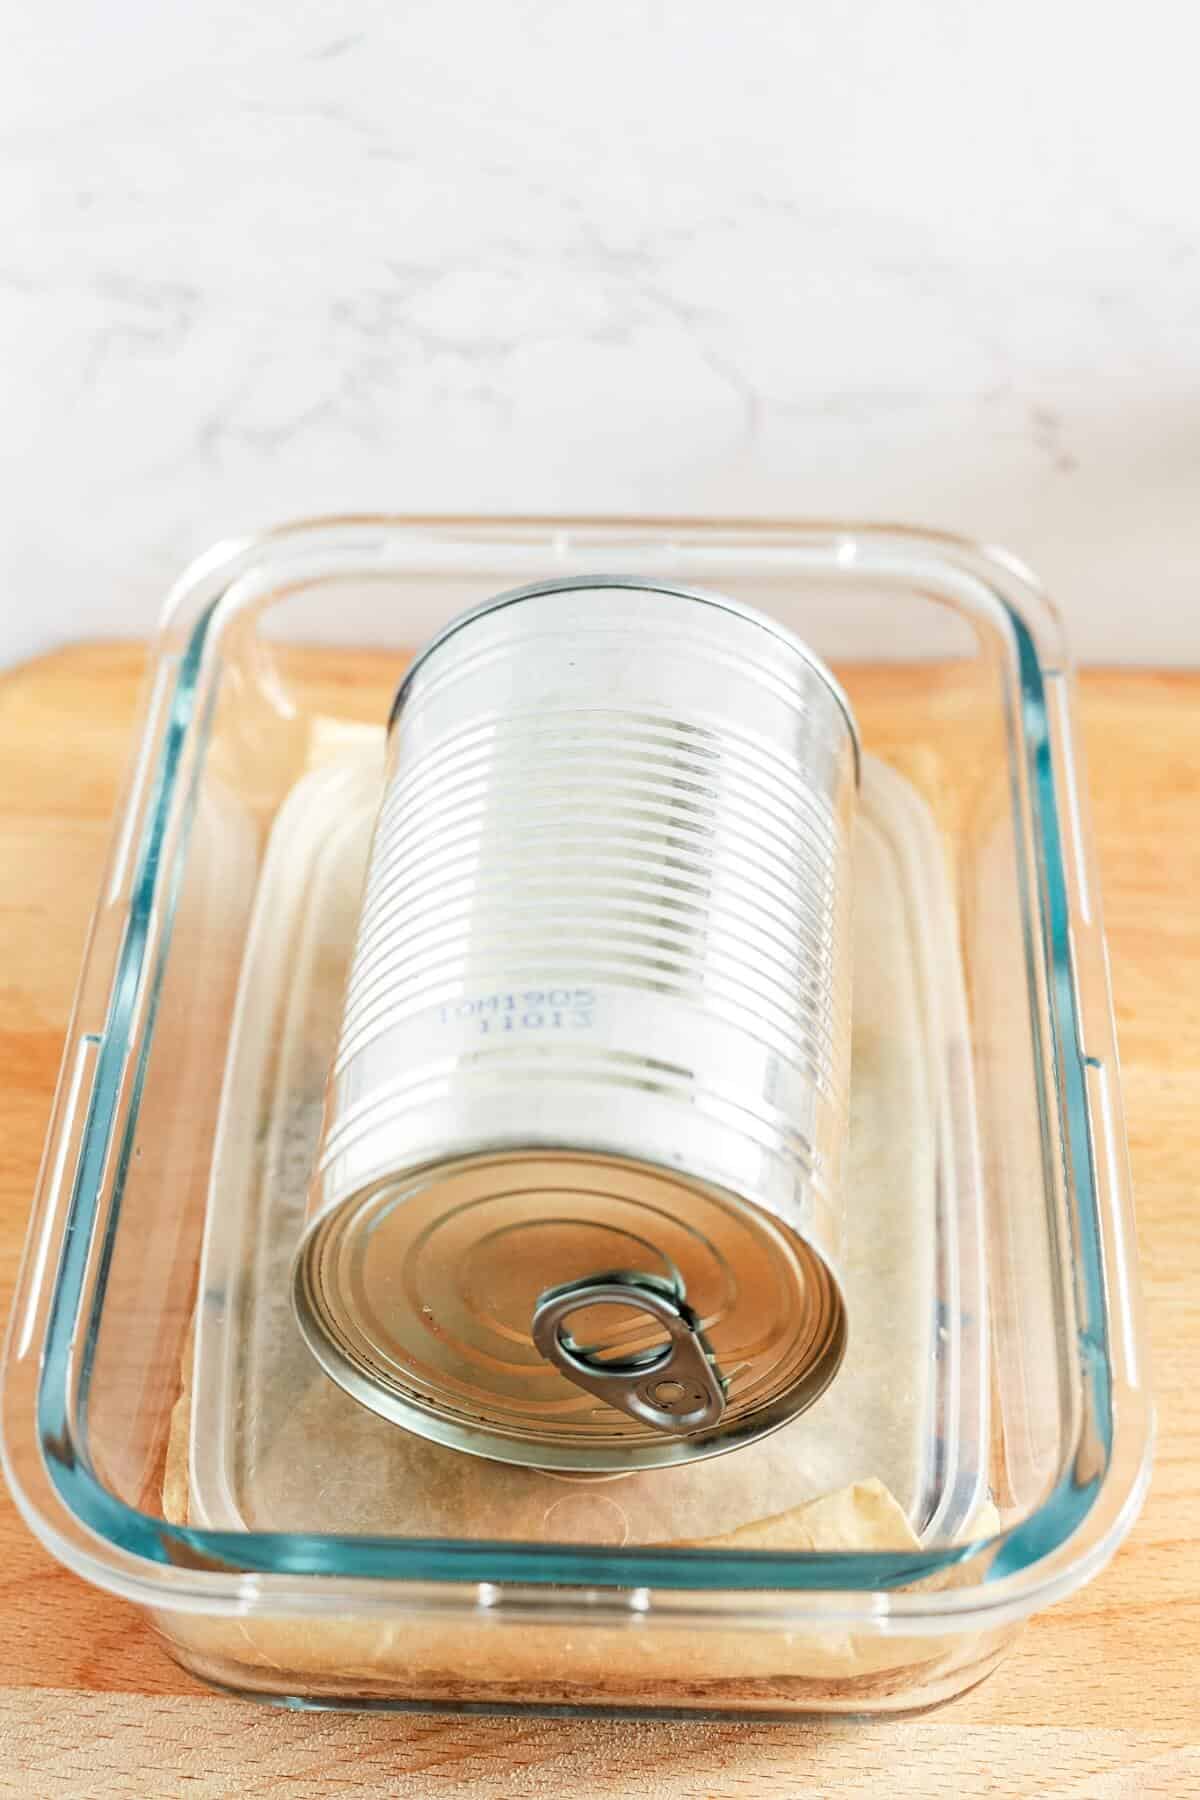 A tin can sitting on a plastic lid and inside a glass dish.